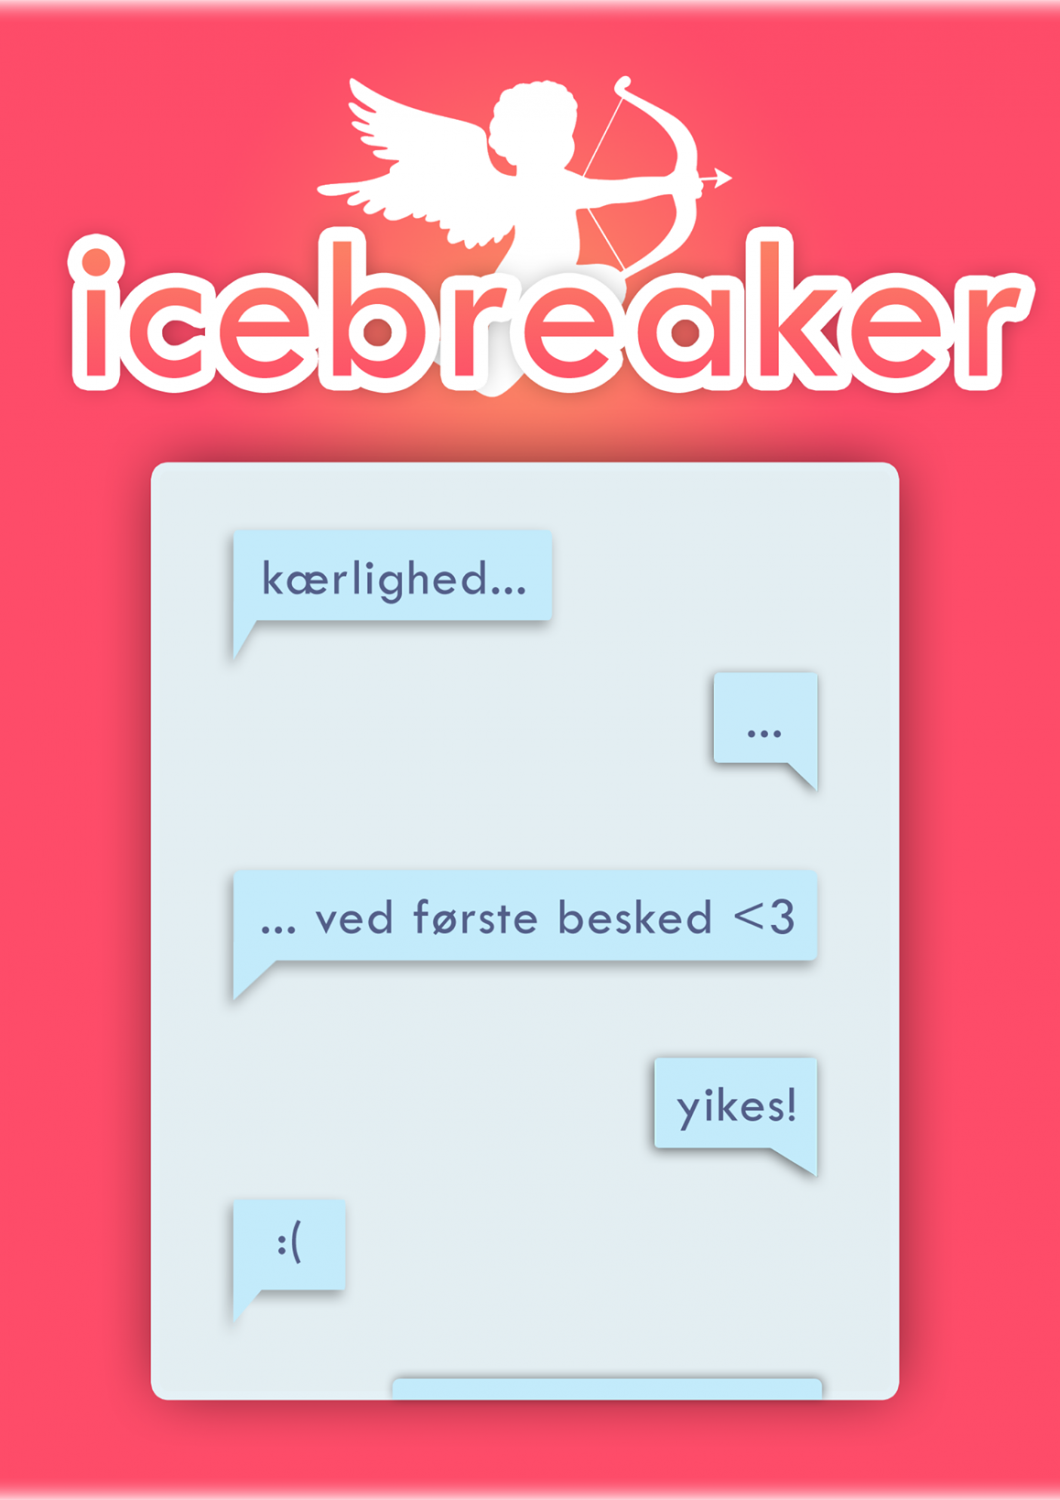 Icebreaker – the tinder chat game